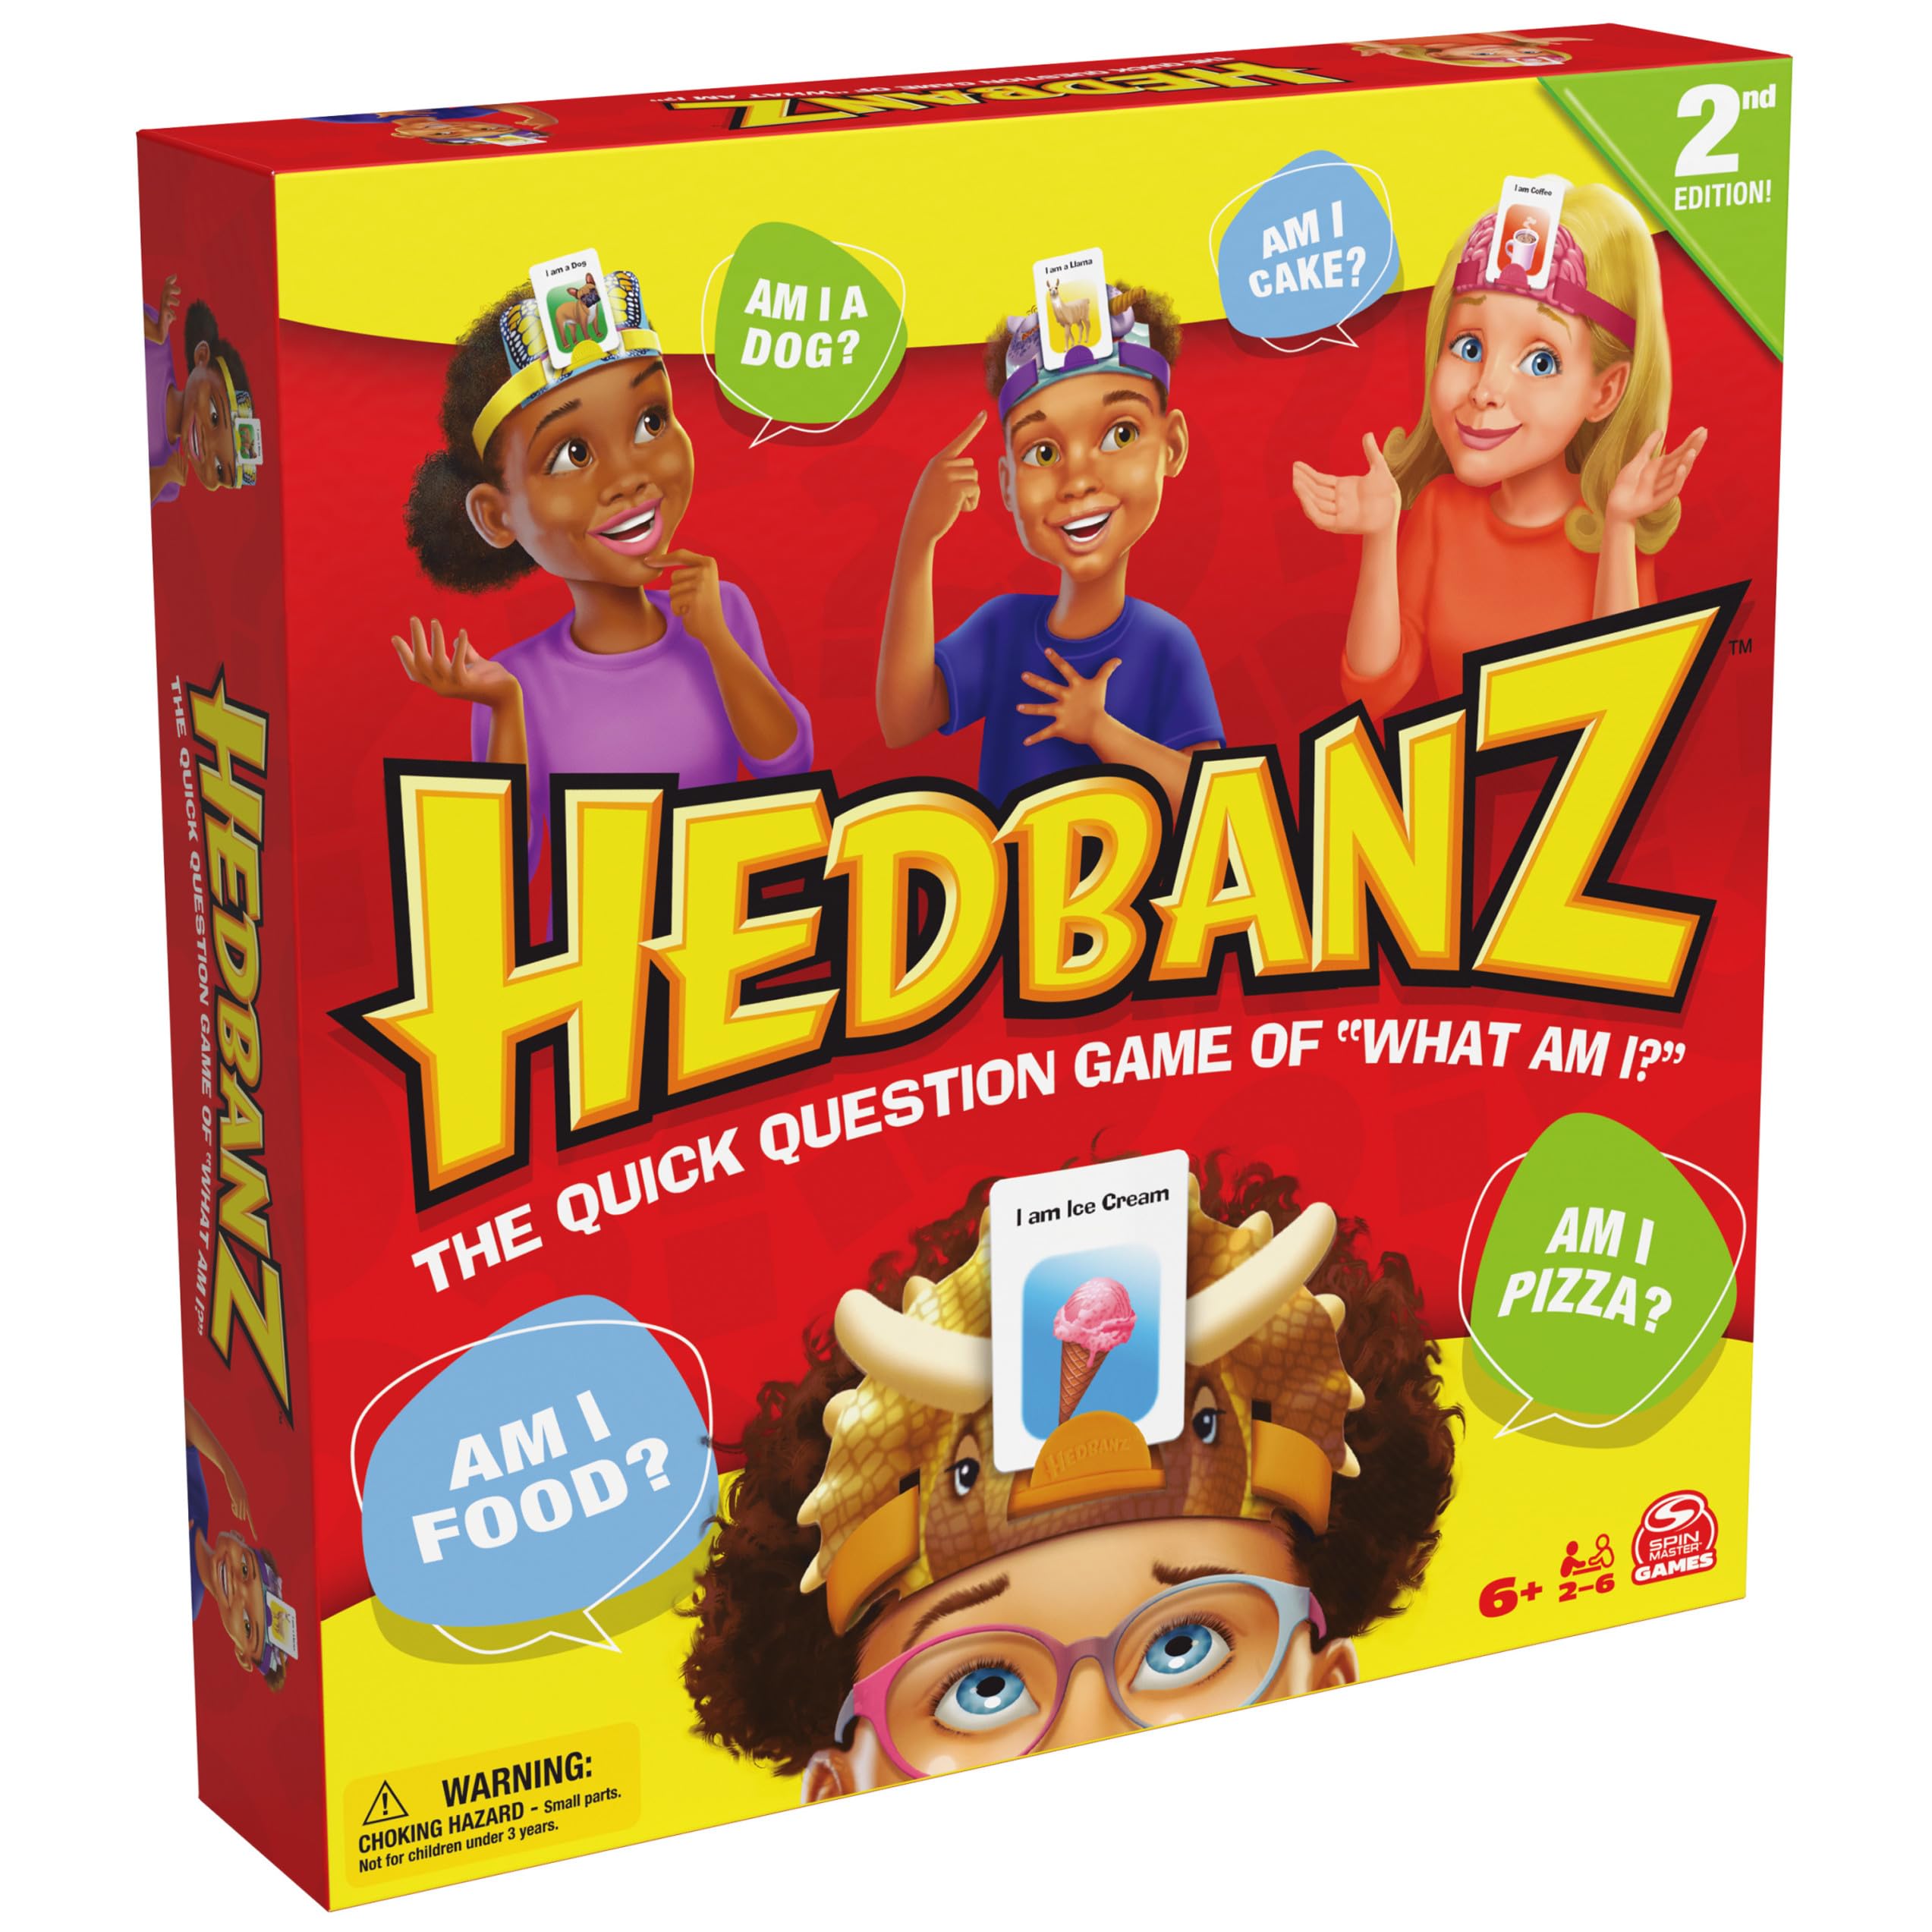 Hedbanz 2nd Edition Picture Guessing Board Game- Family Games | Games for Family Game Night| Kids Games | Card Games for Families & Kids Ages 6 and up